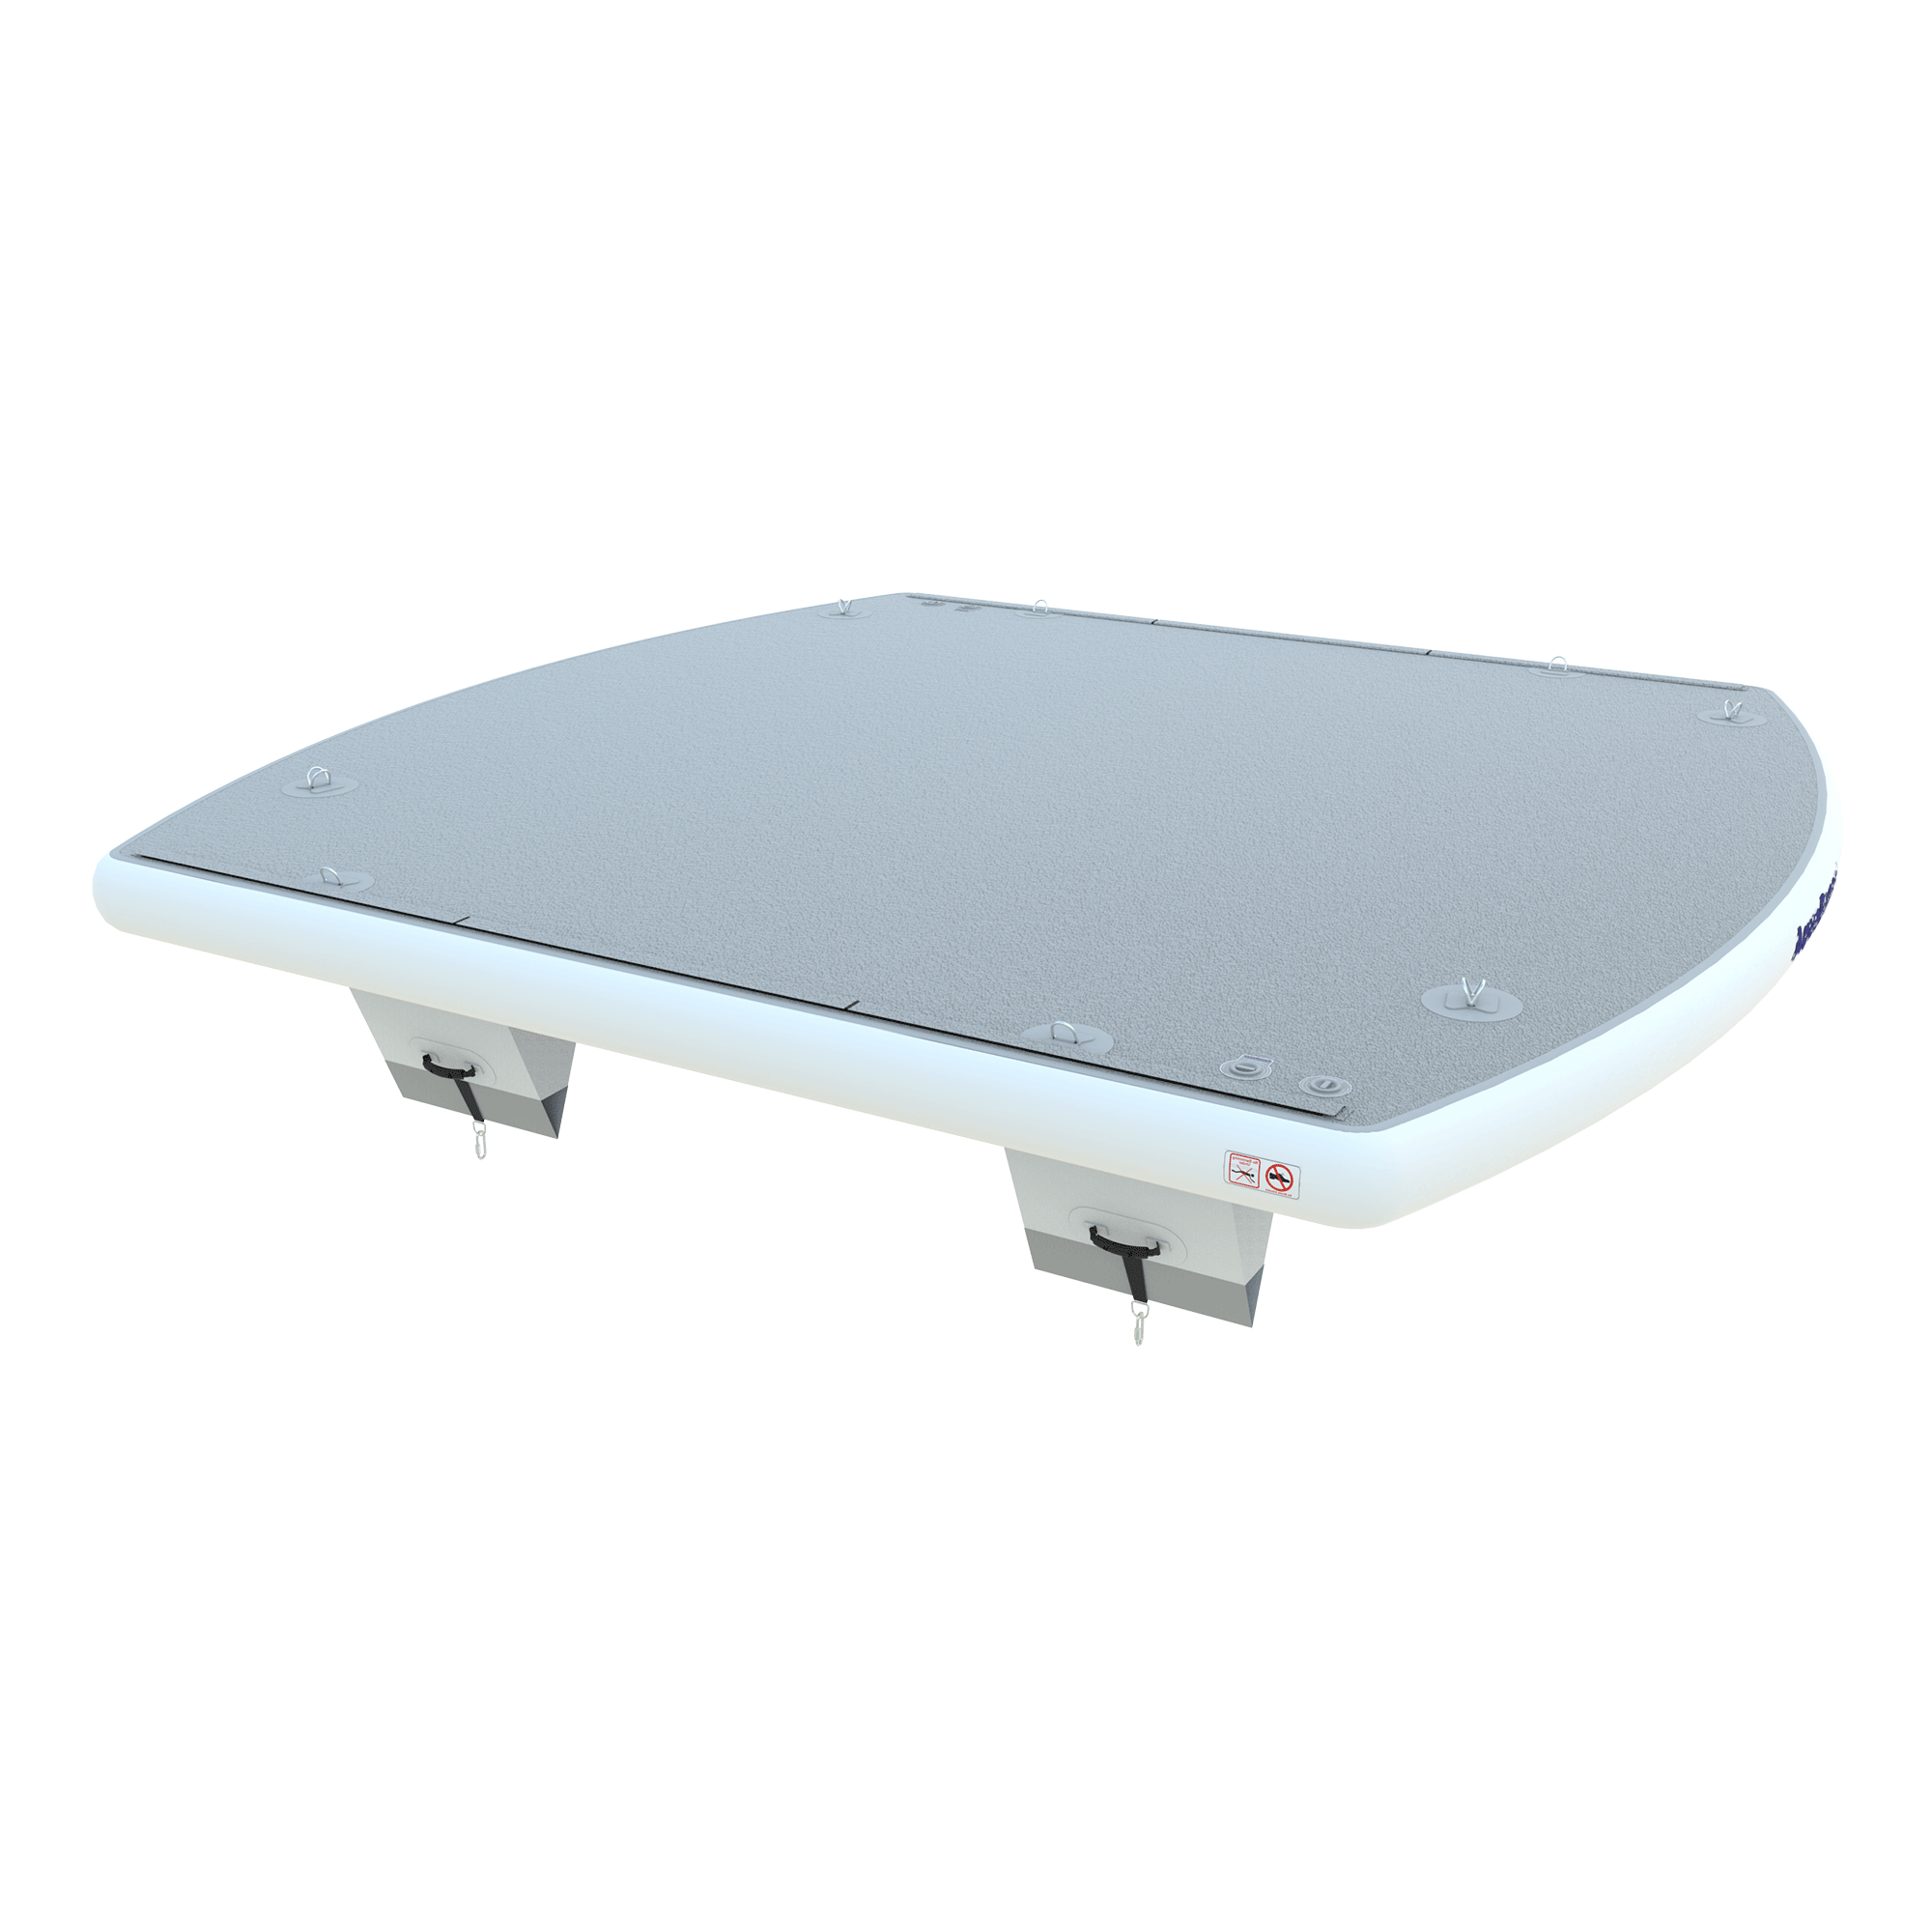 aquabanas-product-couch-bana-floating-deck.png